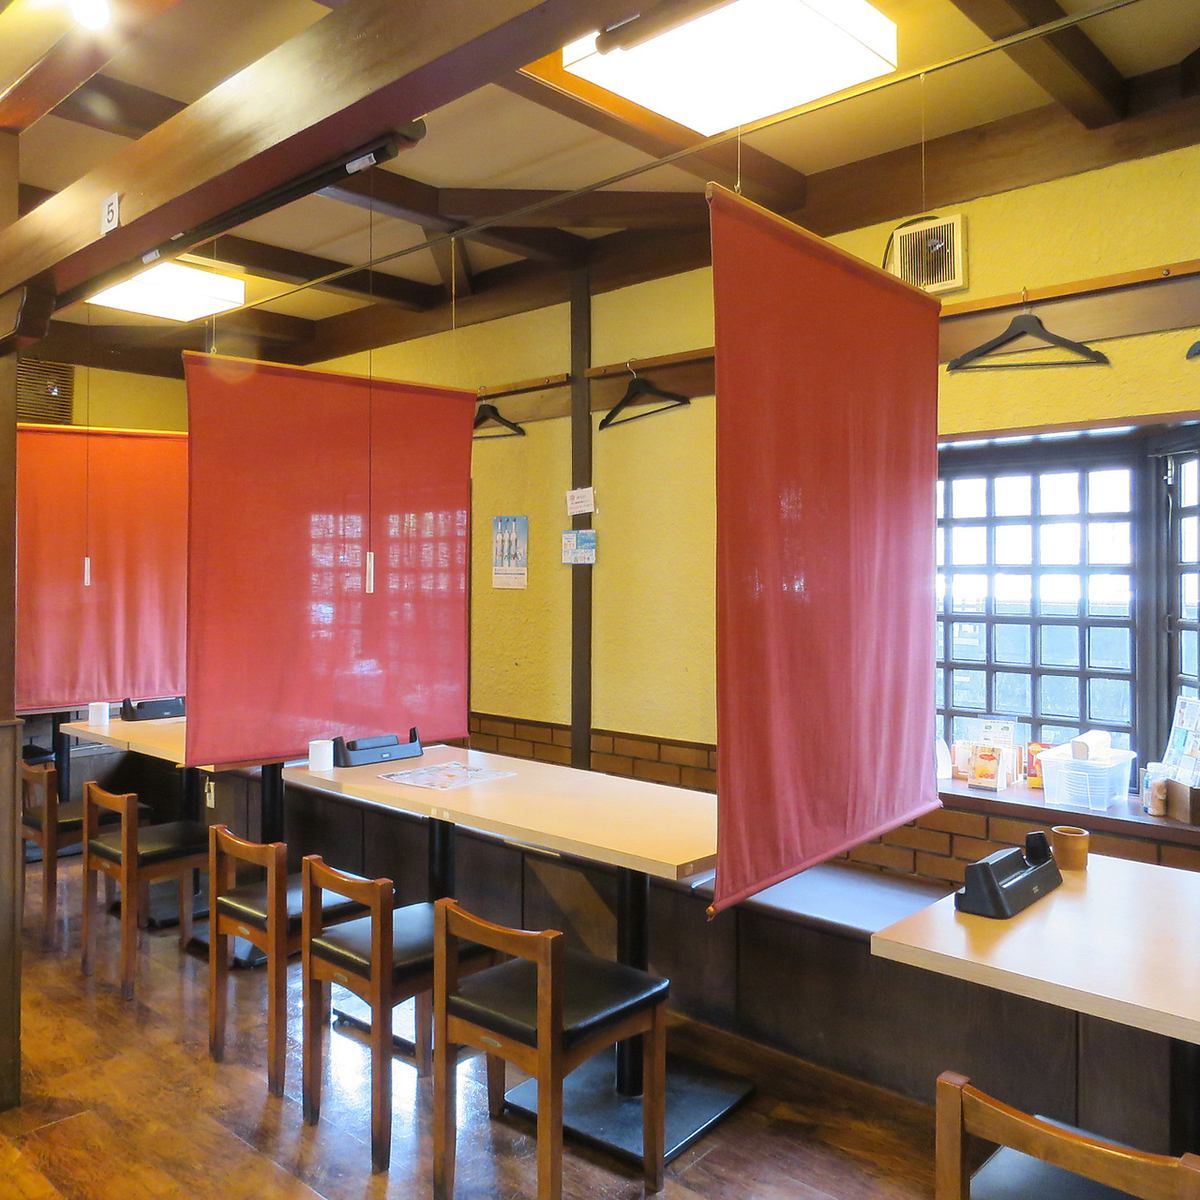 Children are also welcome in the spacious store and semi-private rooms with sunken kotatsu seats!